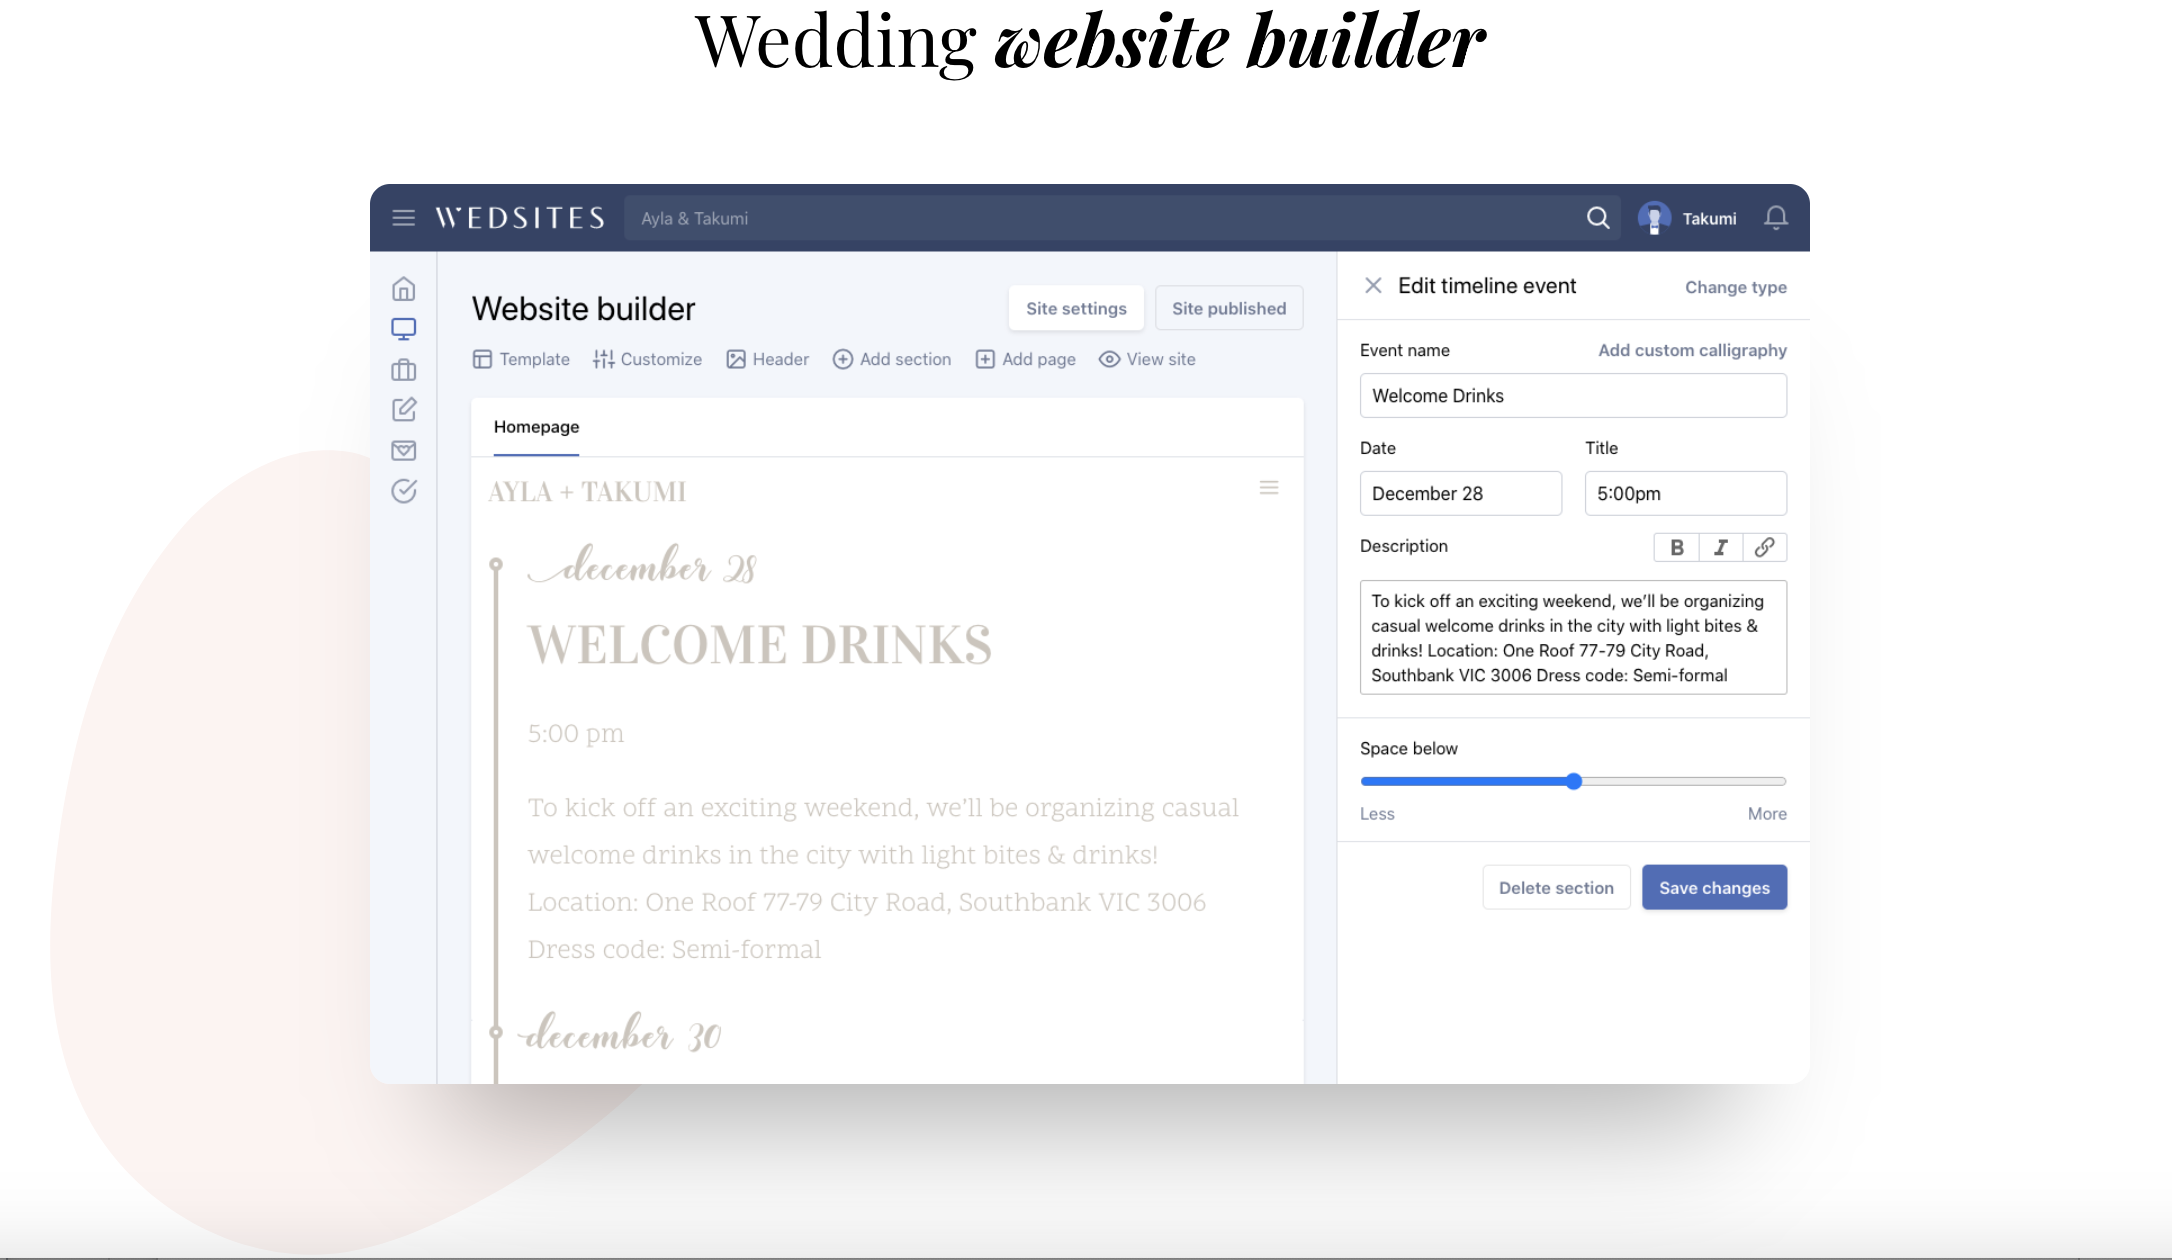 A screenshot from the Wedsites Website depicting how easy it is for your to set up your wedding website using their website builder. We see easy drag and drop and fill in information that is all customziable